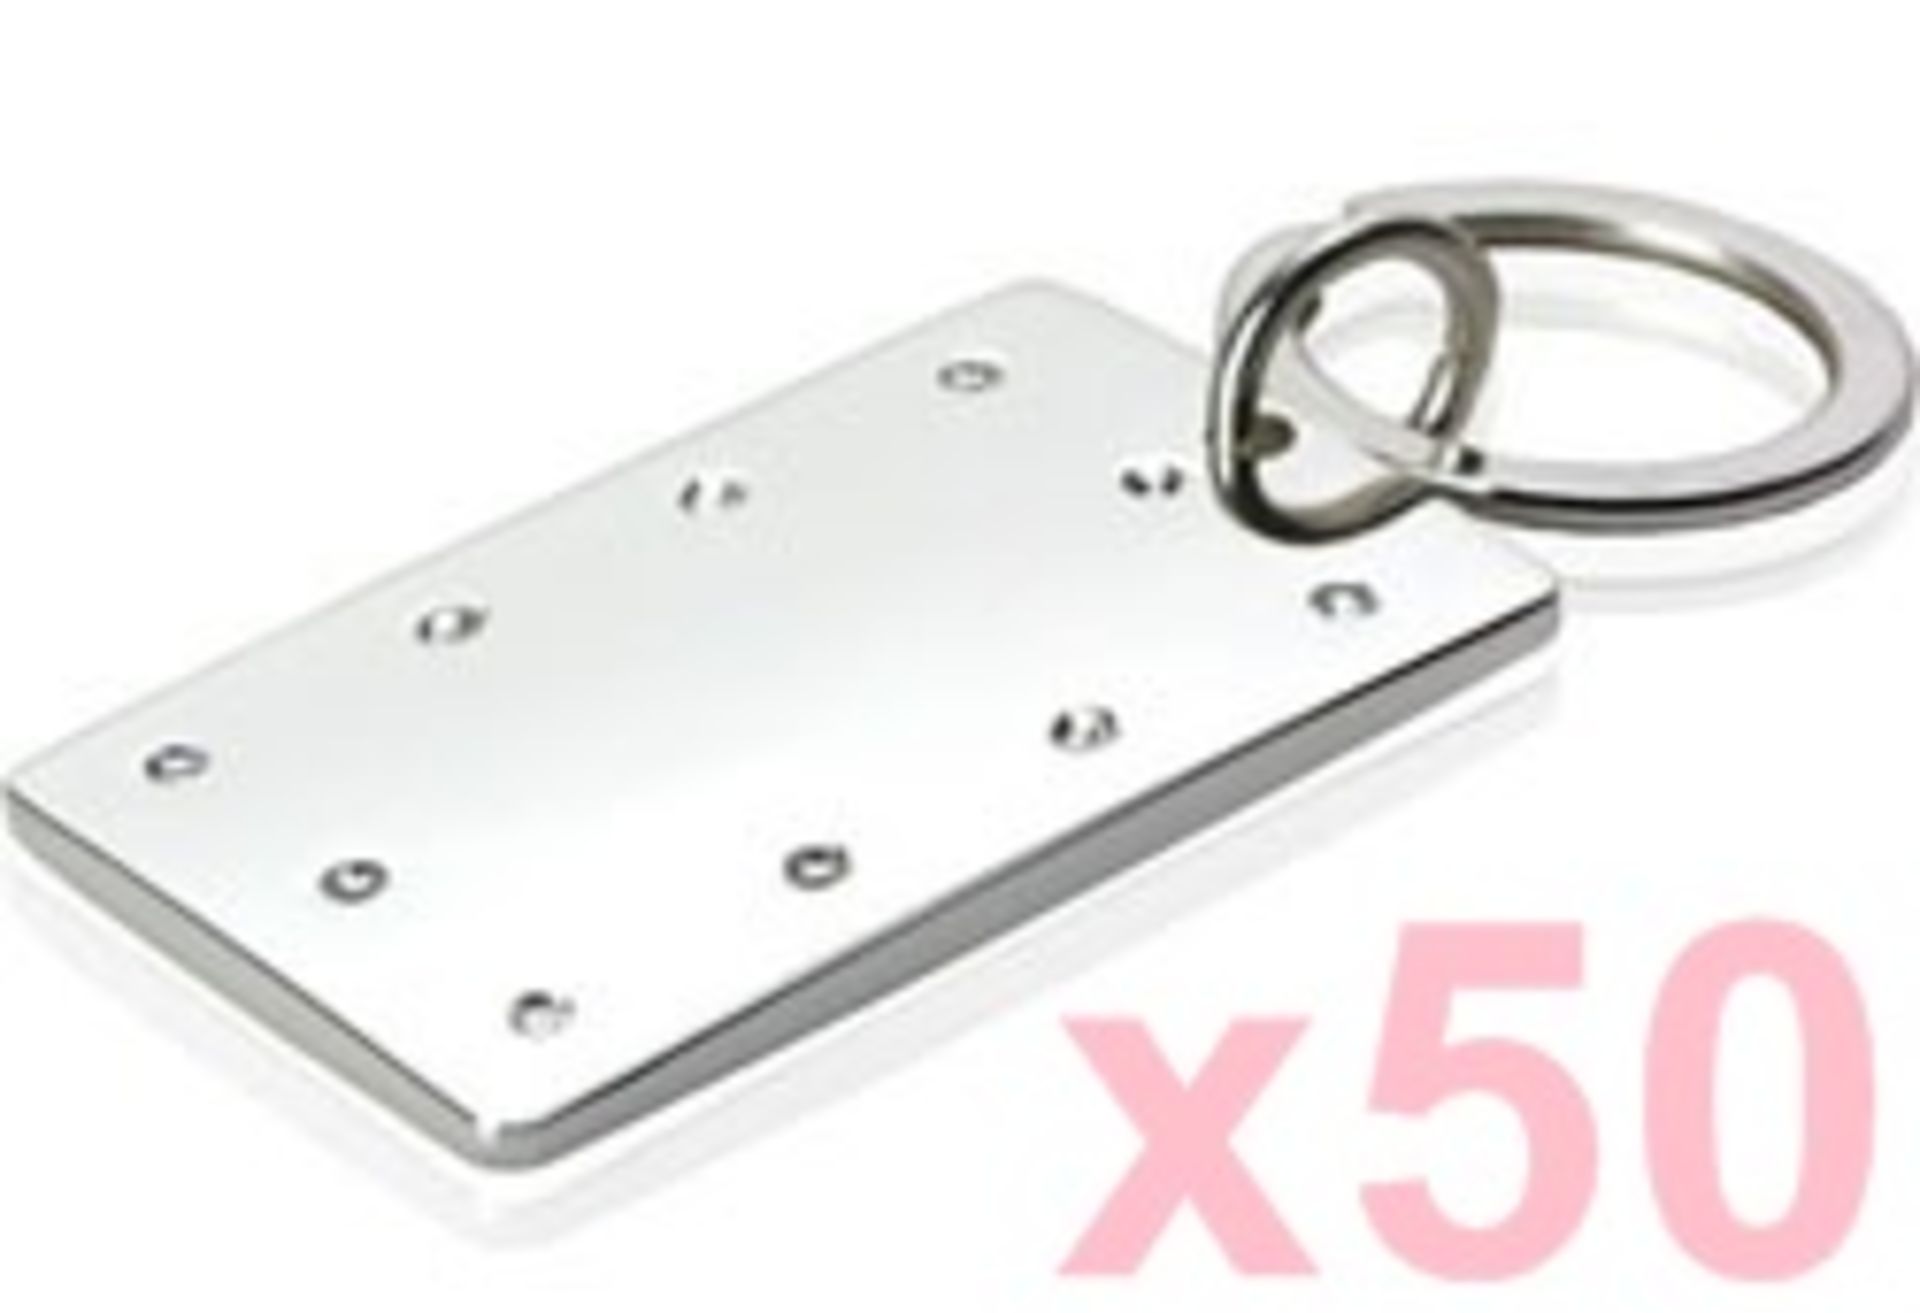 50 x Silver Plated Rectangular Key Rings By ICE London - MADE WITH "SWAROVSKI¨ ELEMENTS - Luxury - Image 2 of 3